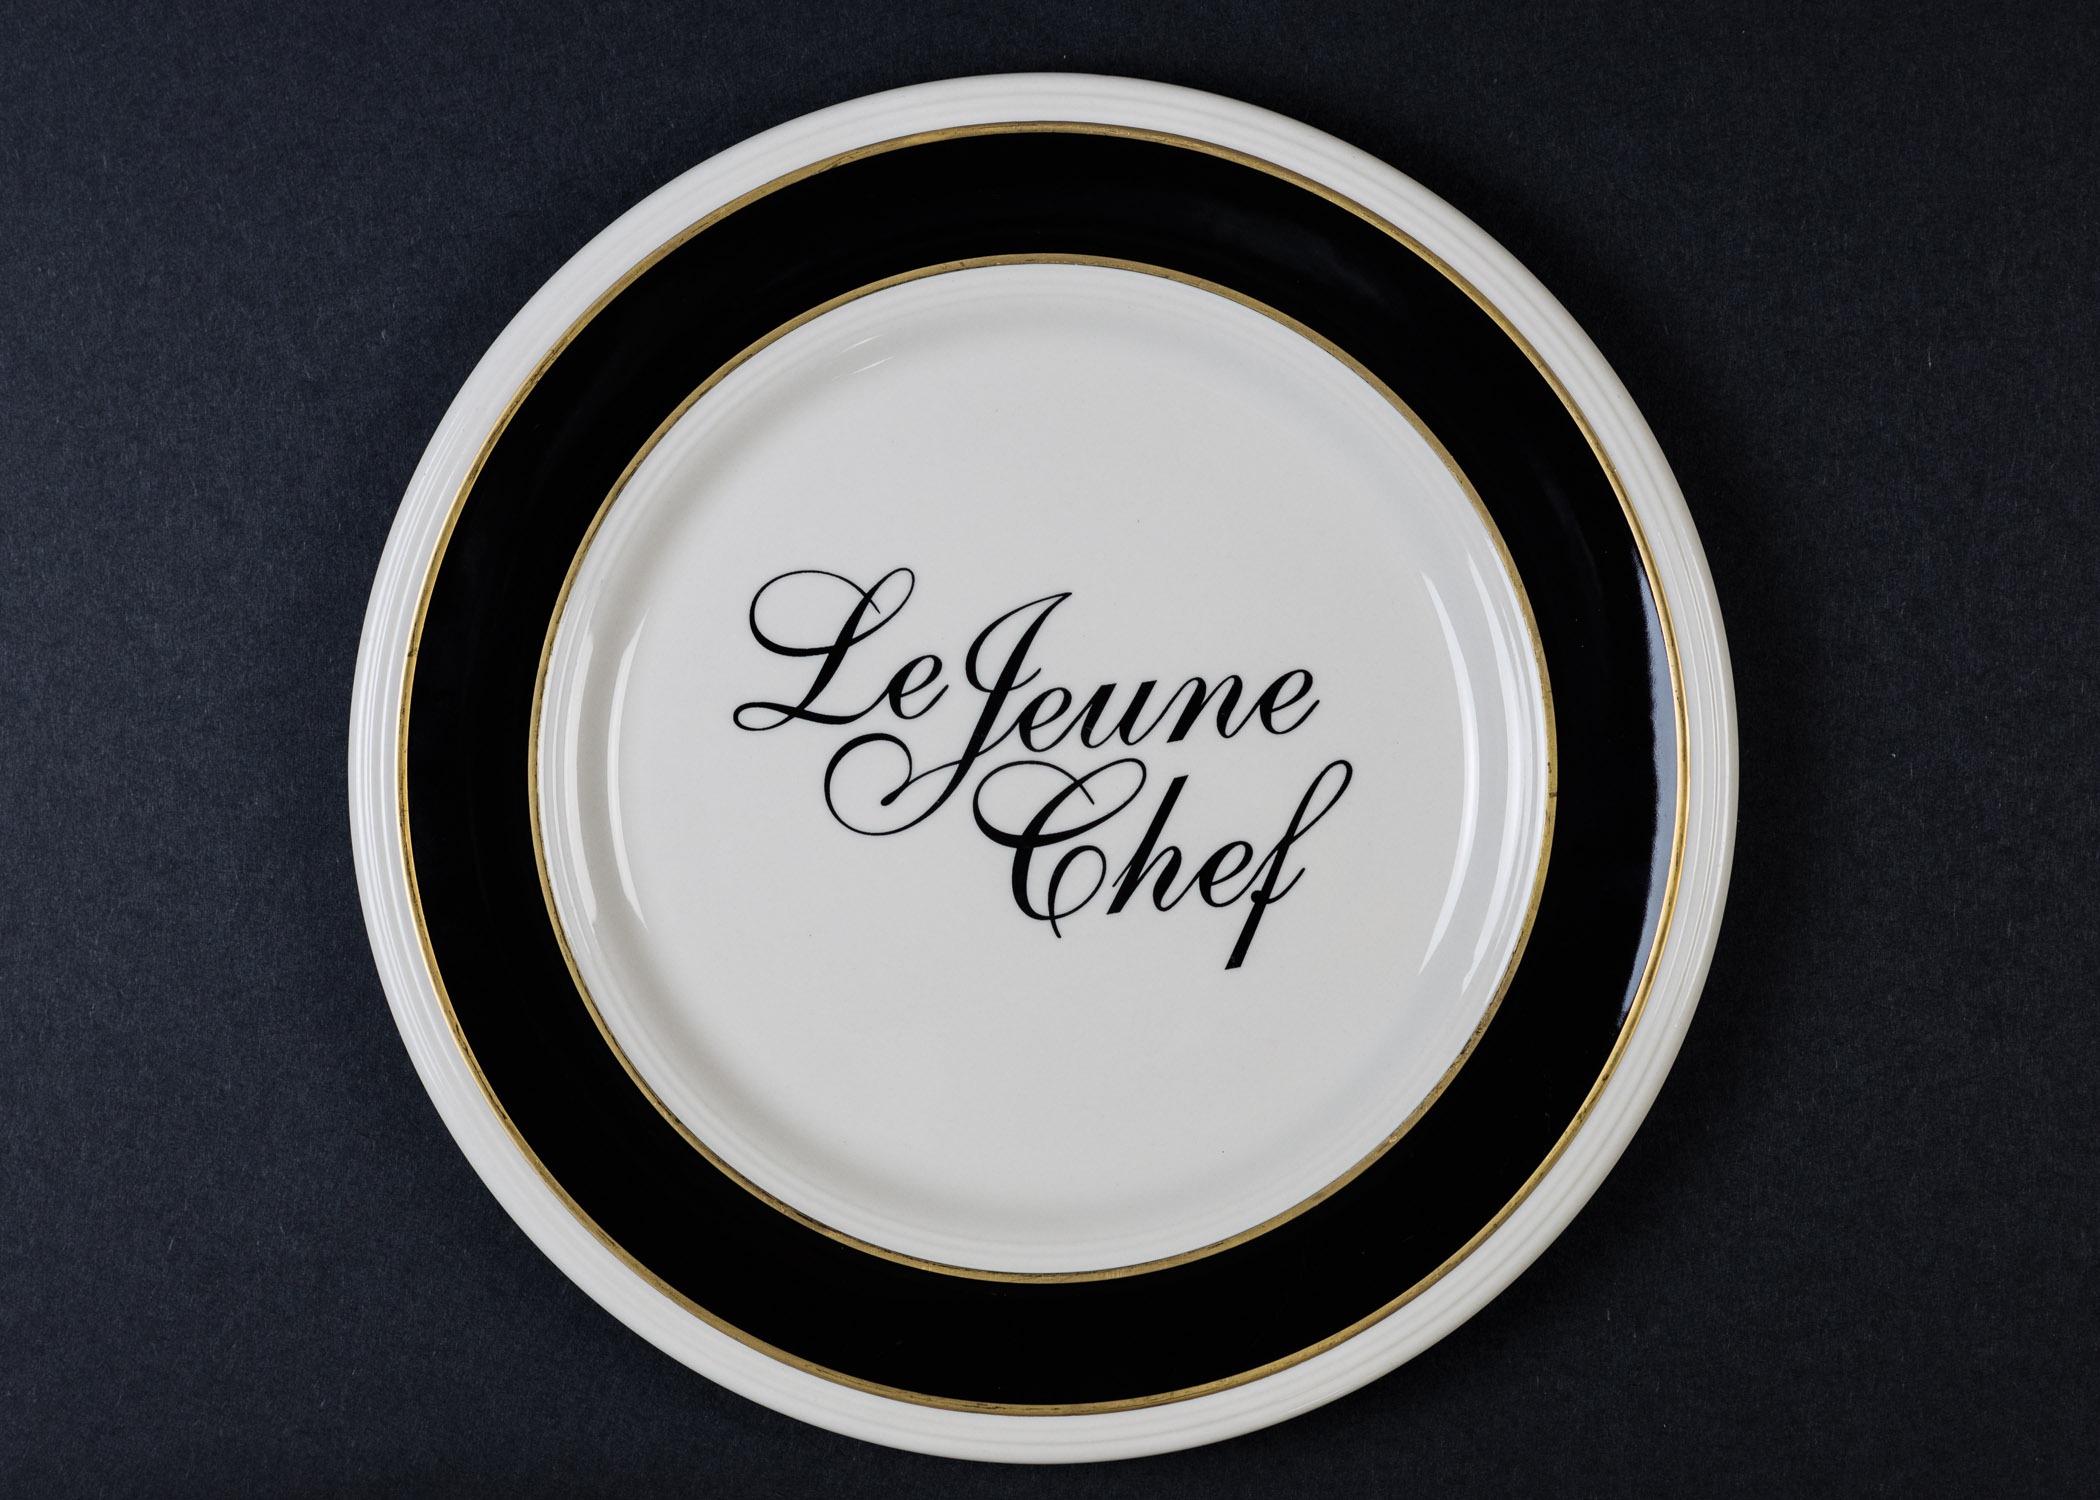 WBRE to broadcast live Wednesday morning from Le Jeune Chef